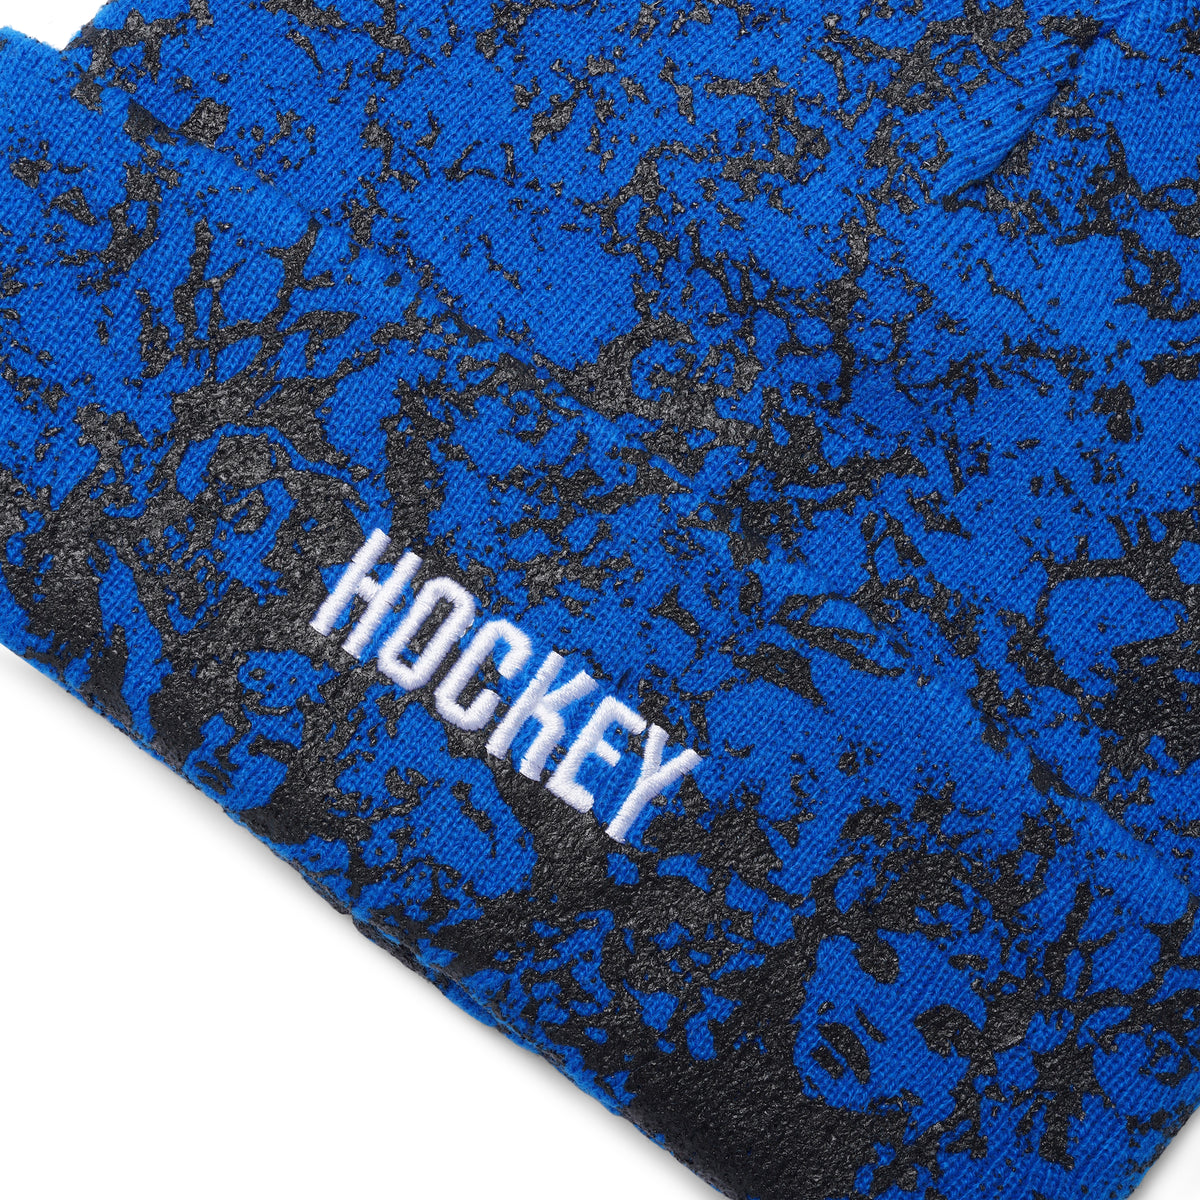 Get the newest Nest Beanie, Blue / Black Hockey version for Great